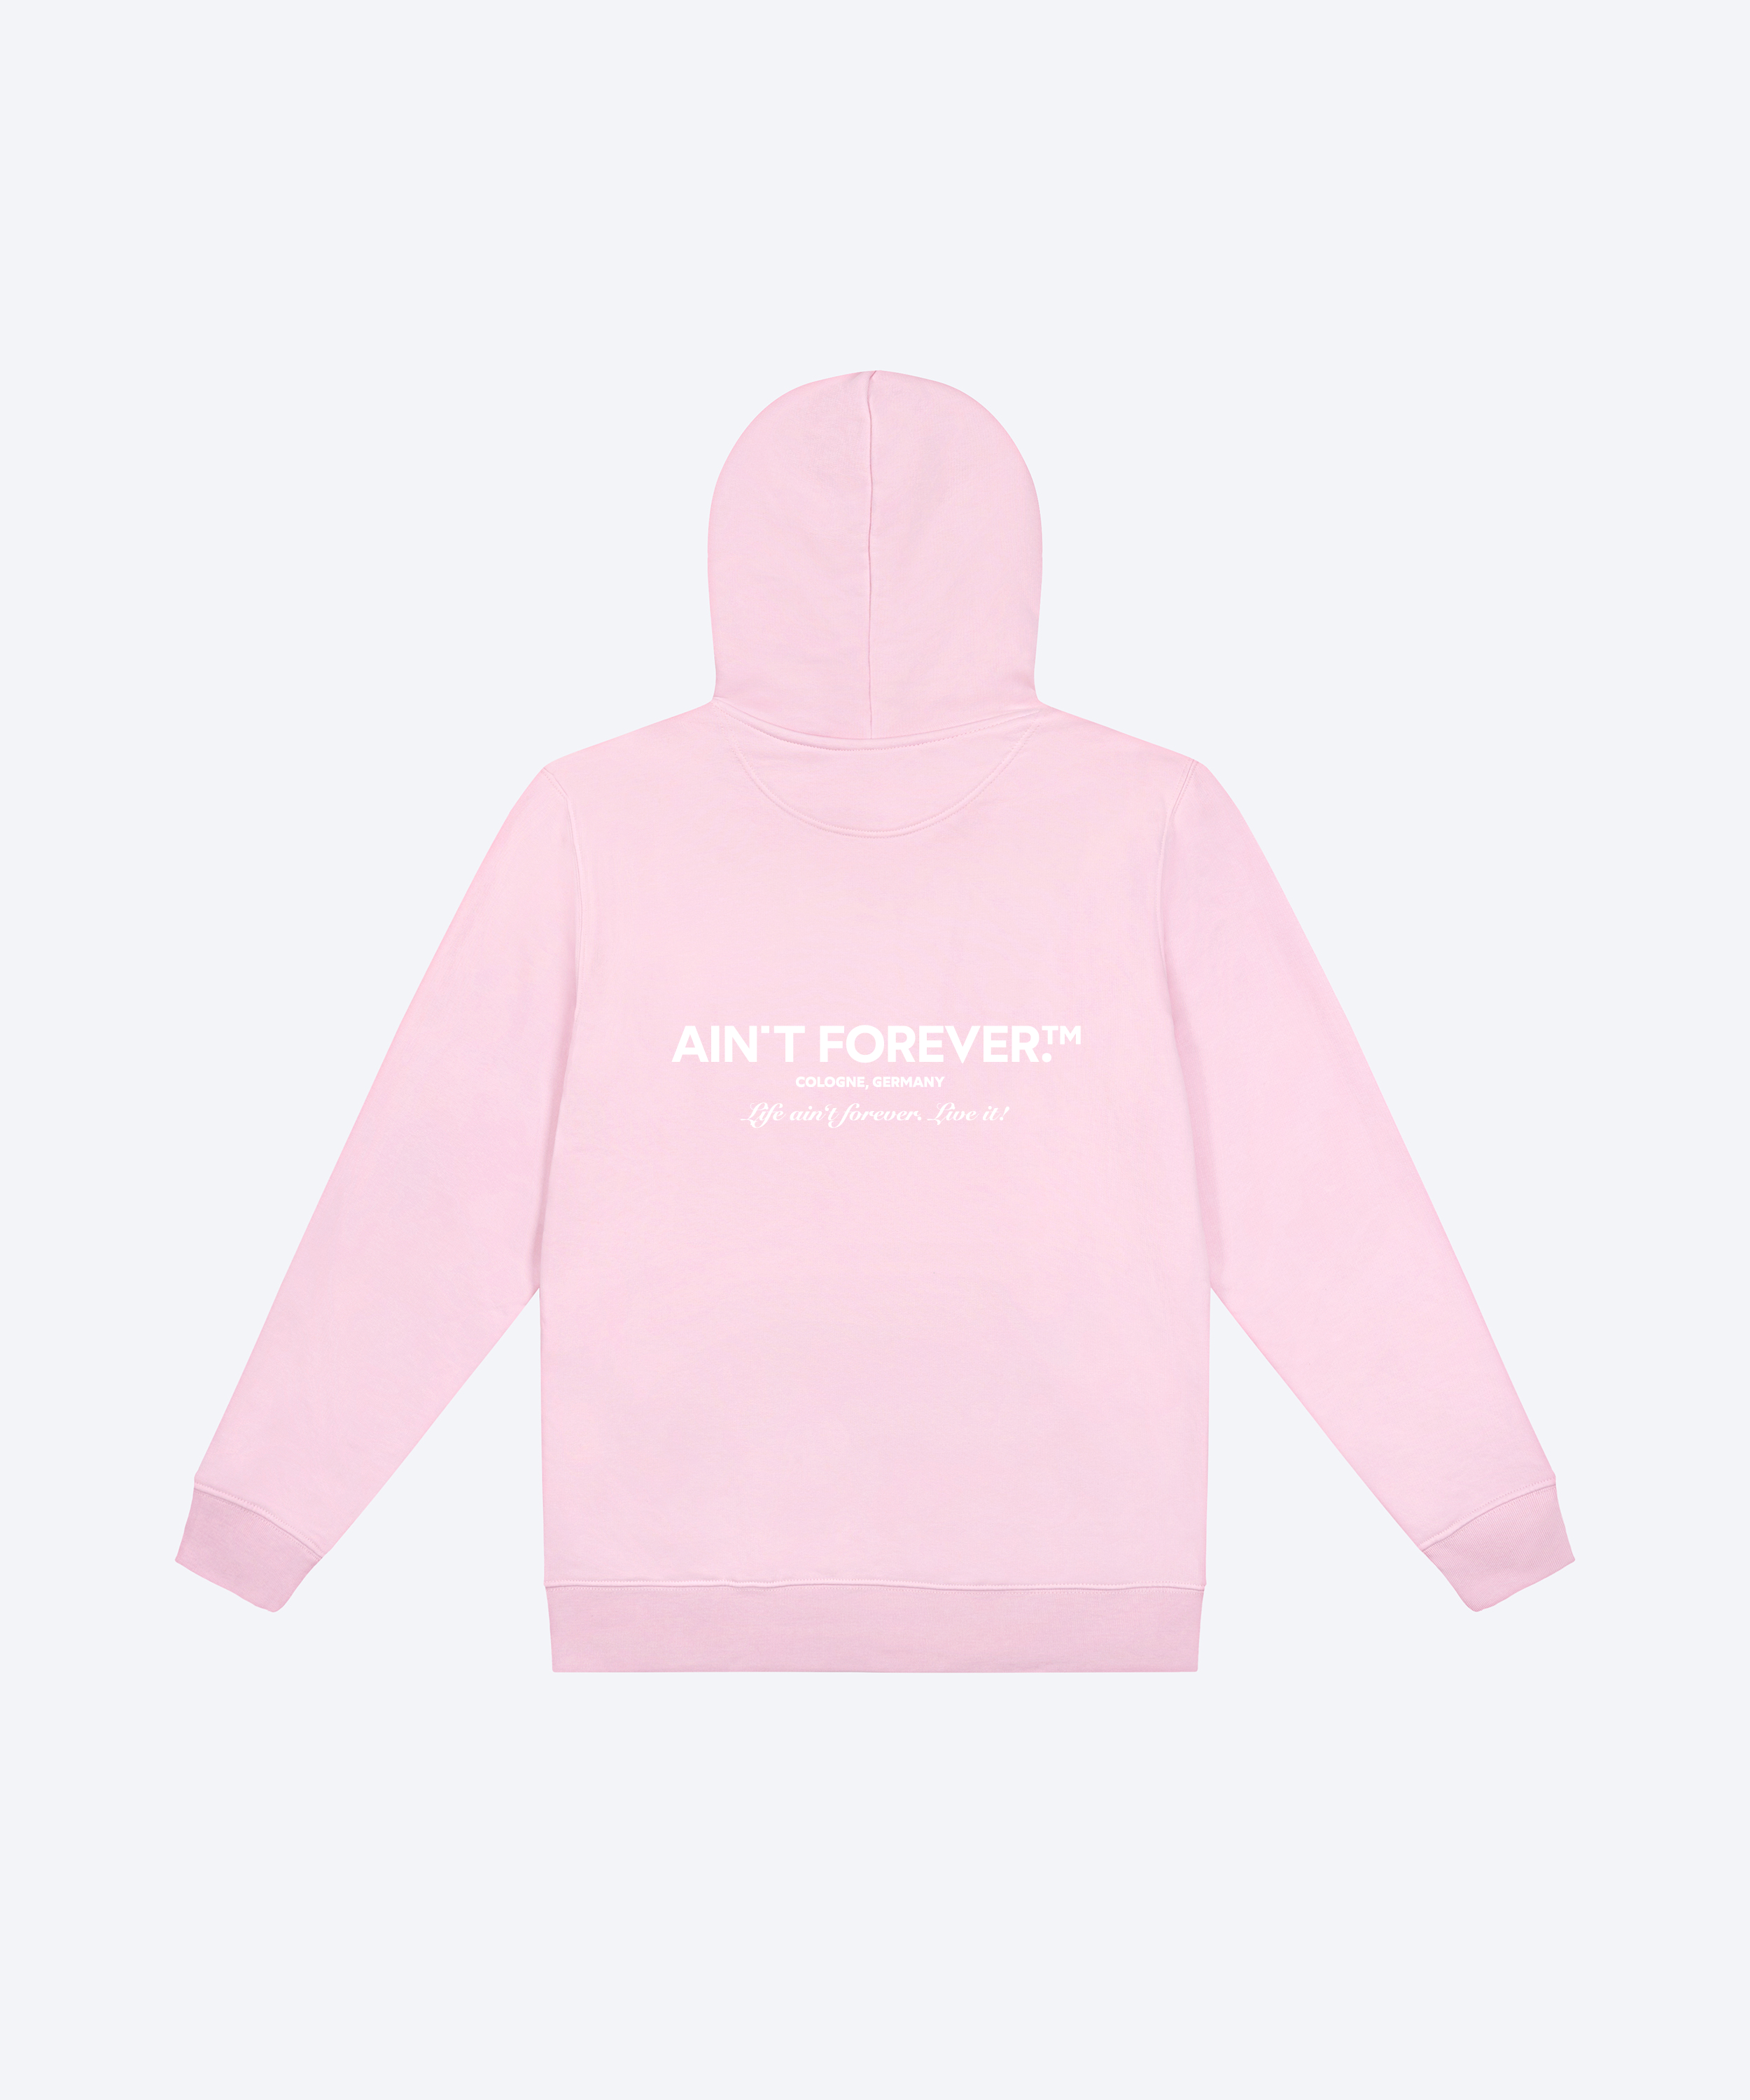 THE LIVE IT! HOODIE (PINK / WHITE)